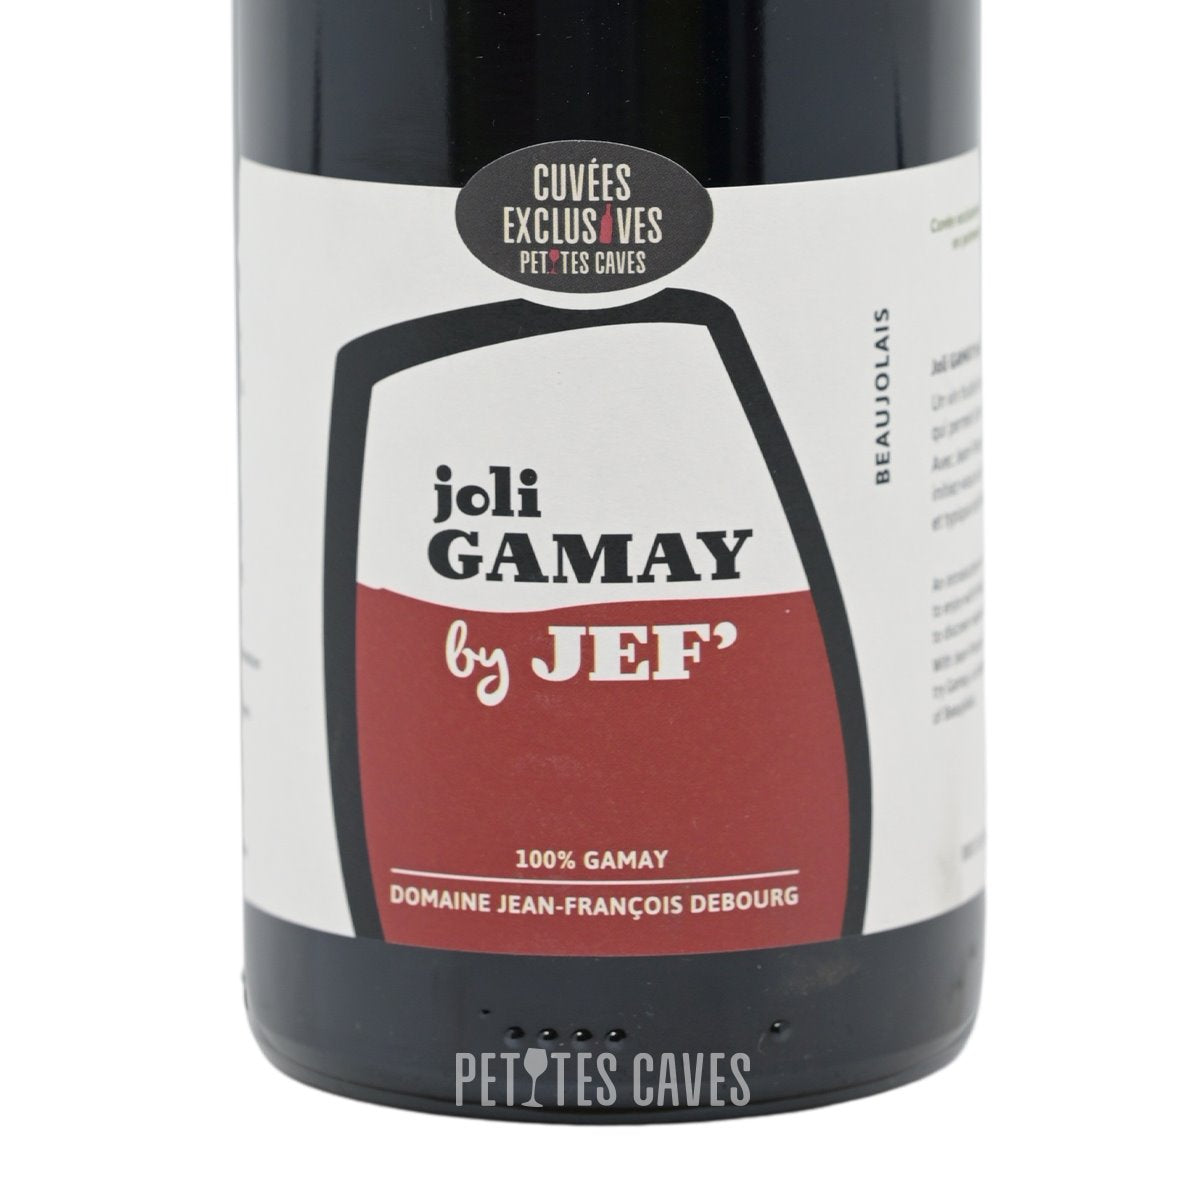 Joli Gamay by Jef 2020 - Beaujolais - Jean-François DEBOURG, an exclusive wine with and for Petites Caves ! ZOOM